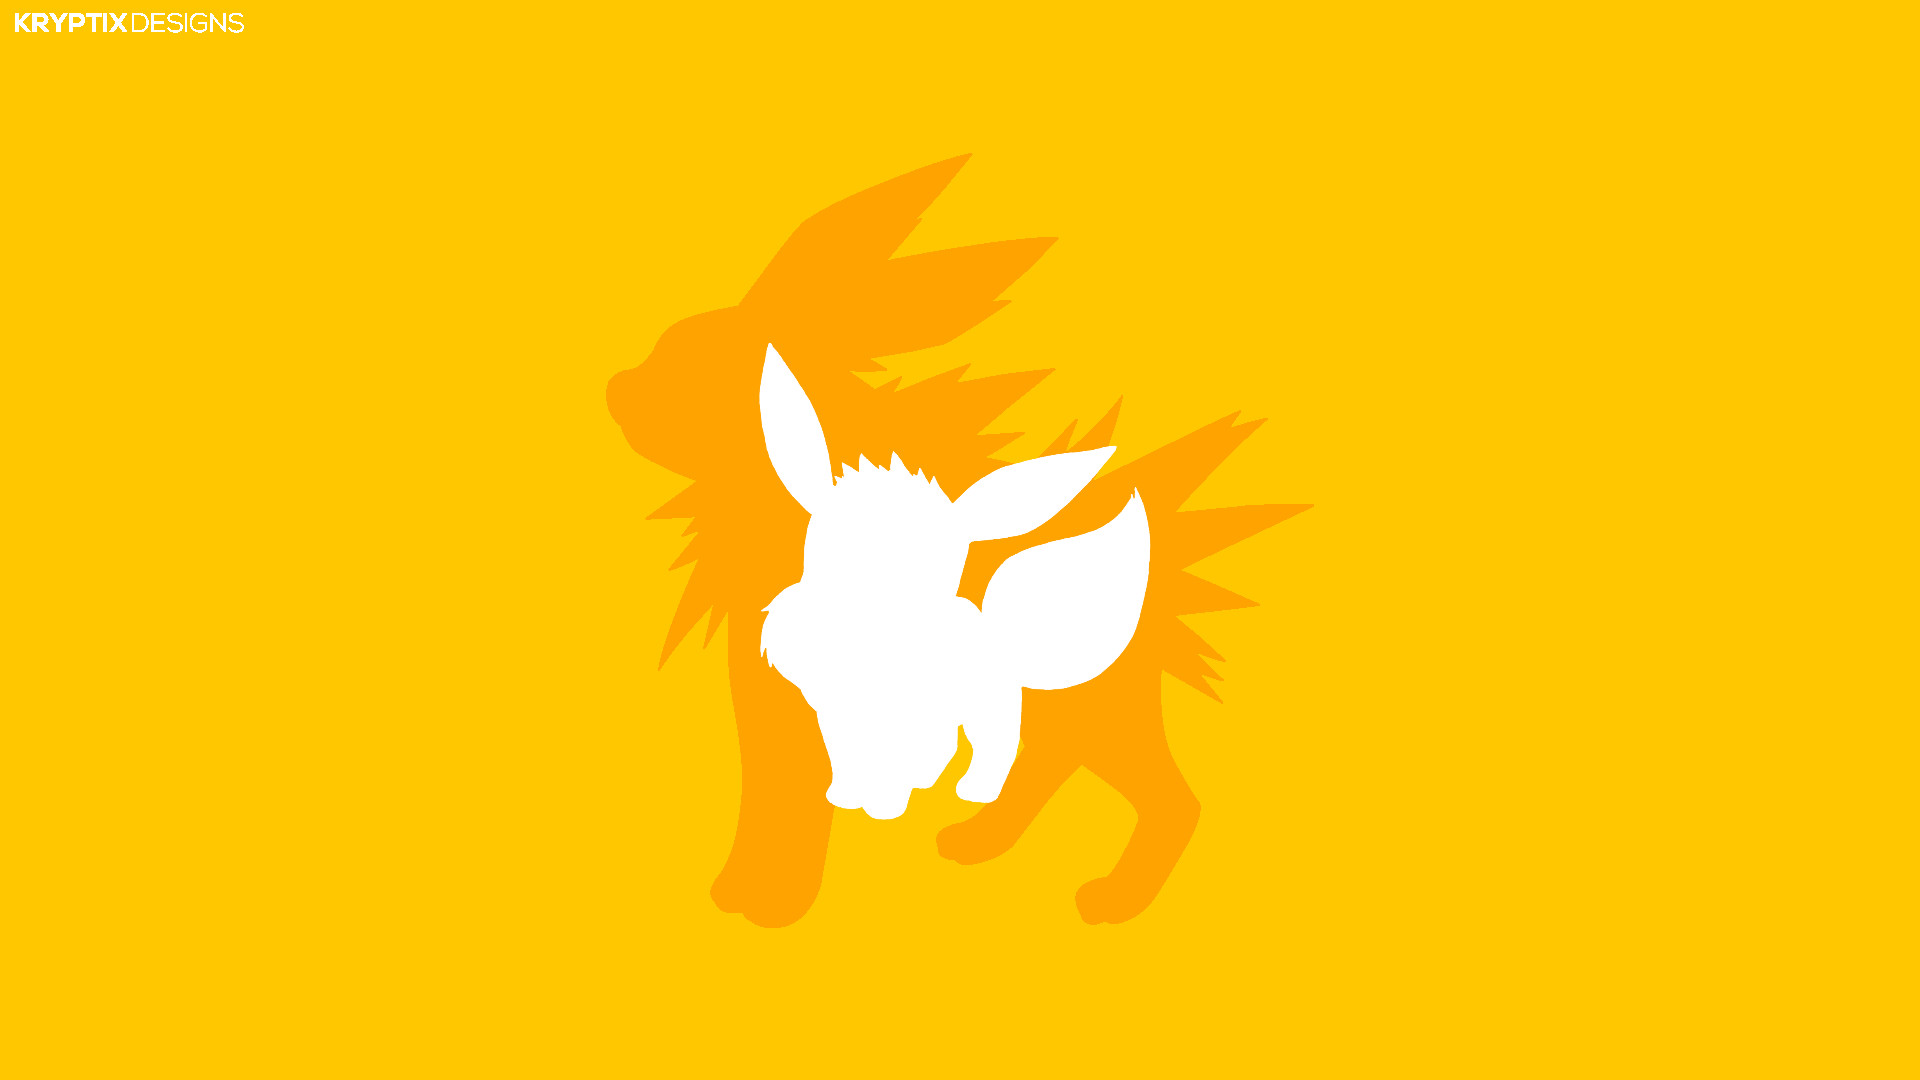 1920x1080 All Eeveelutions Wallpapers HD by KryptixDesigns All Eeveelutions  Wallpapers HD by KryptixDesigns